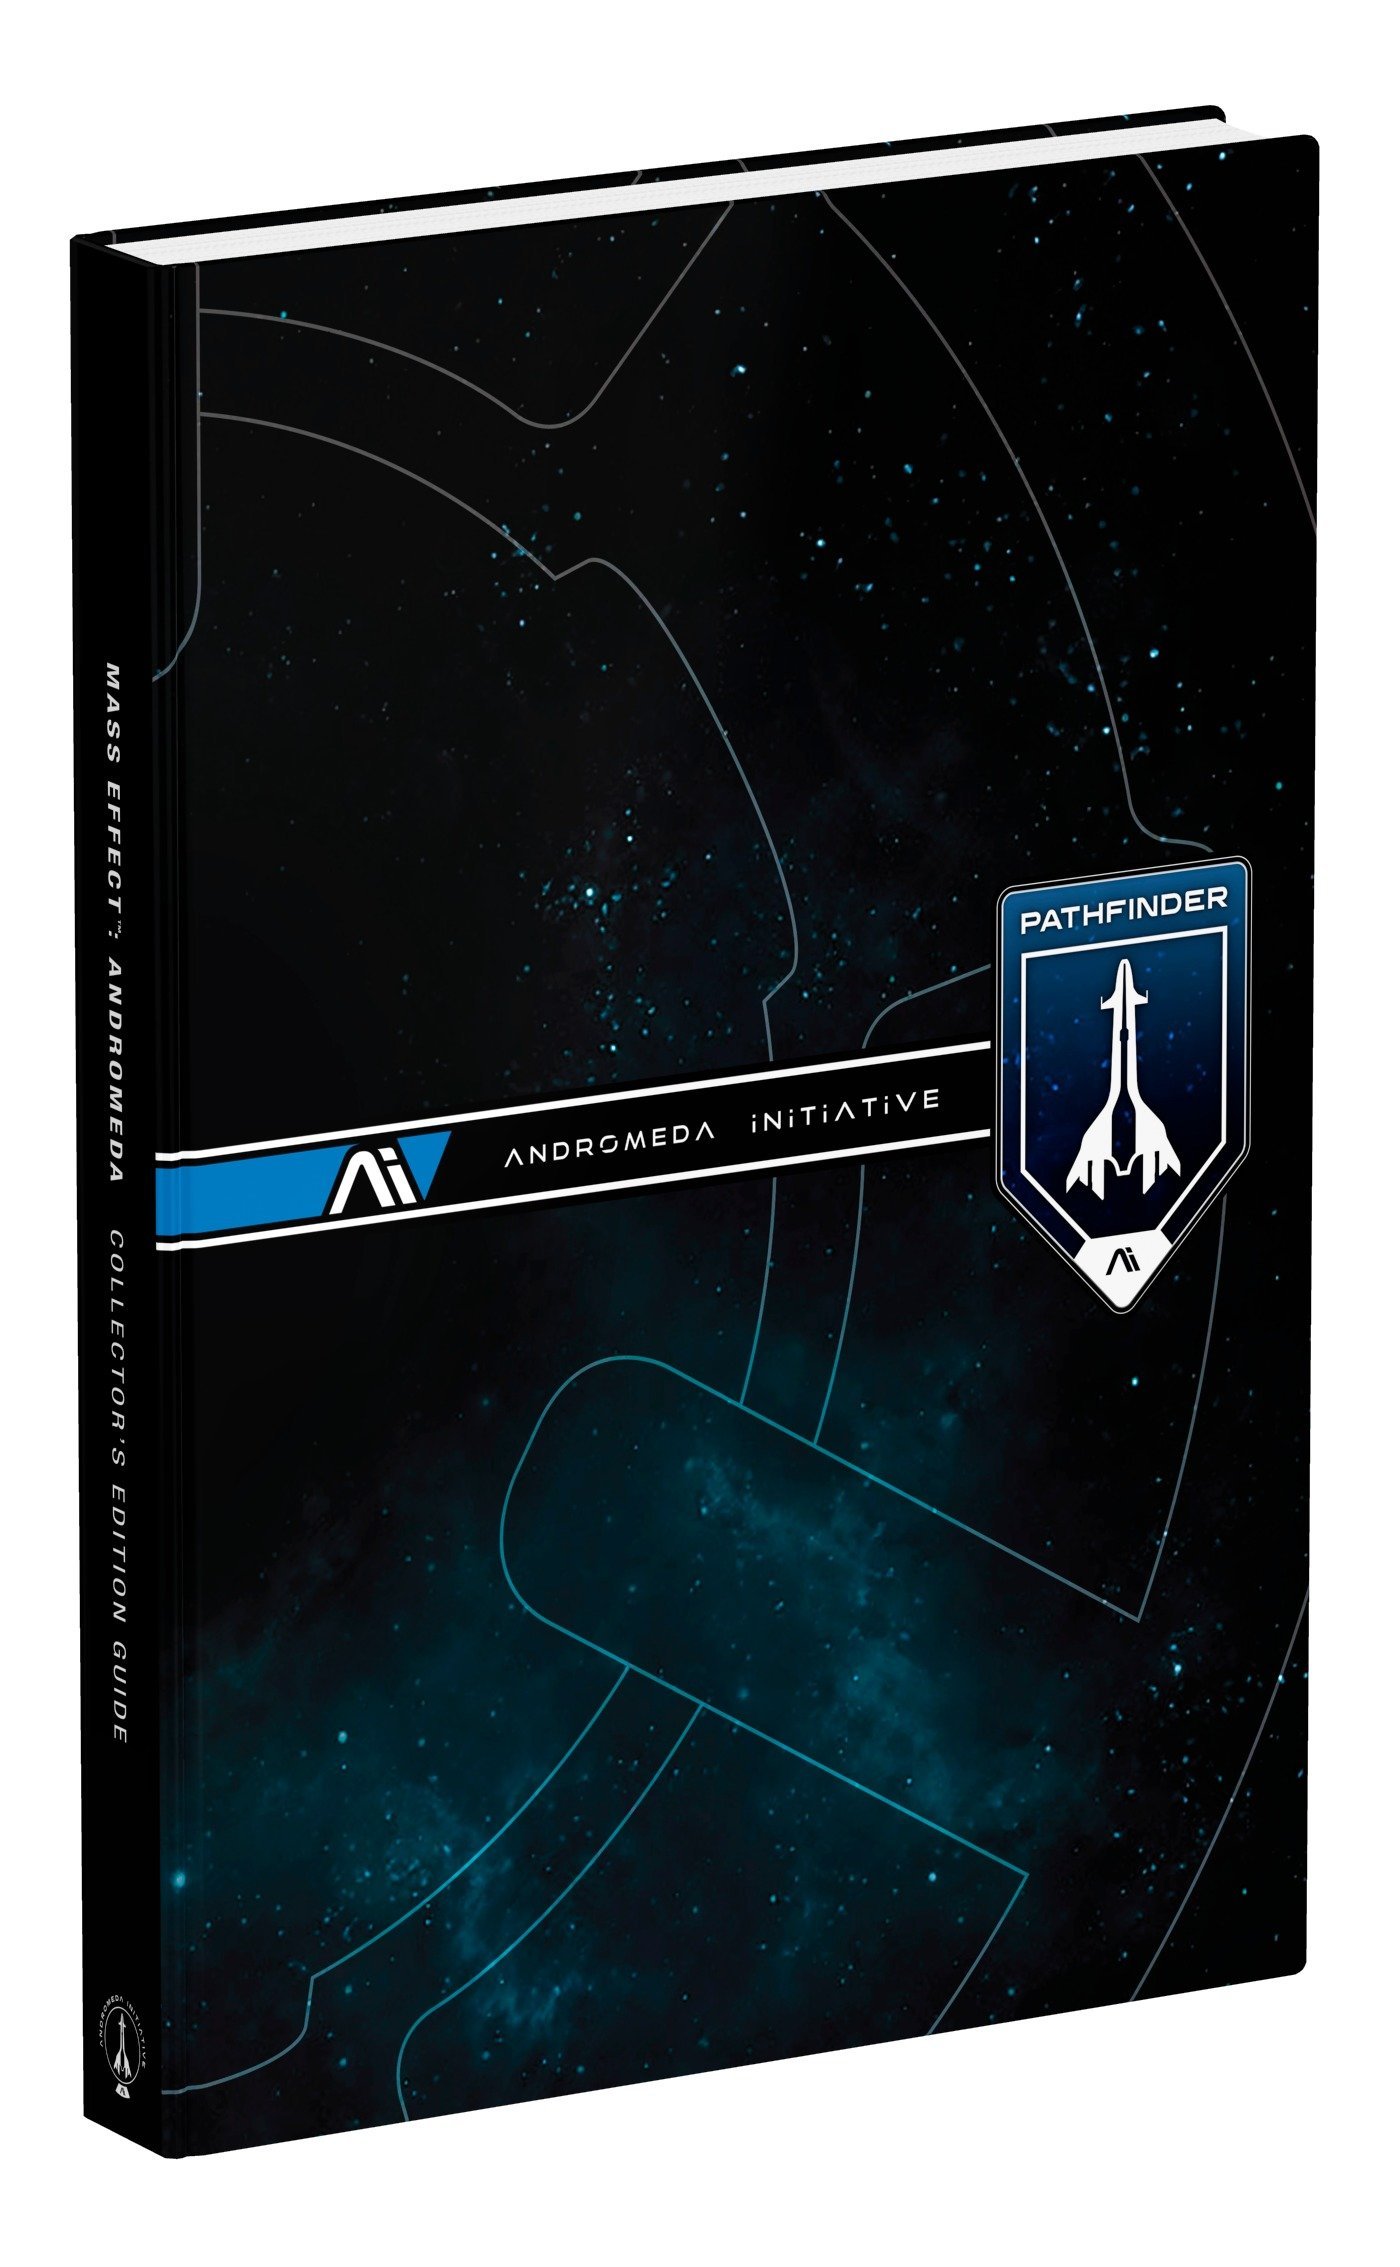 Prima Games - Mass Effect: Andromeda Collector's Edition Guide [FRENCH LANGUAGE]